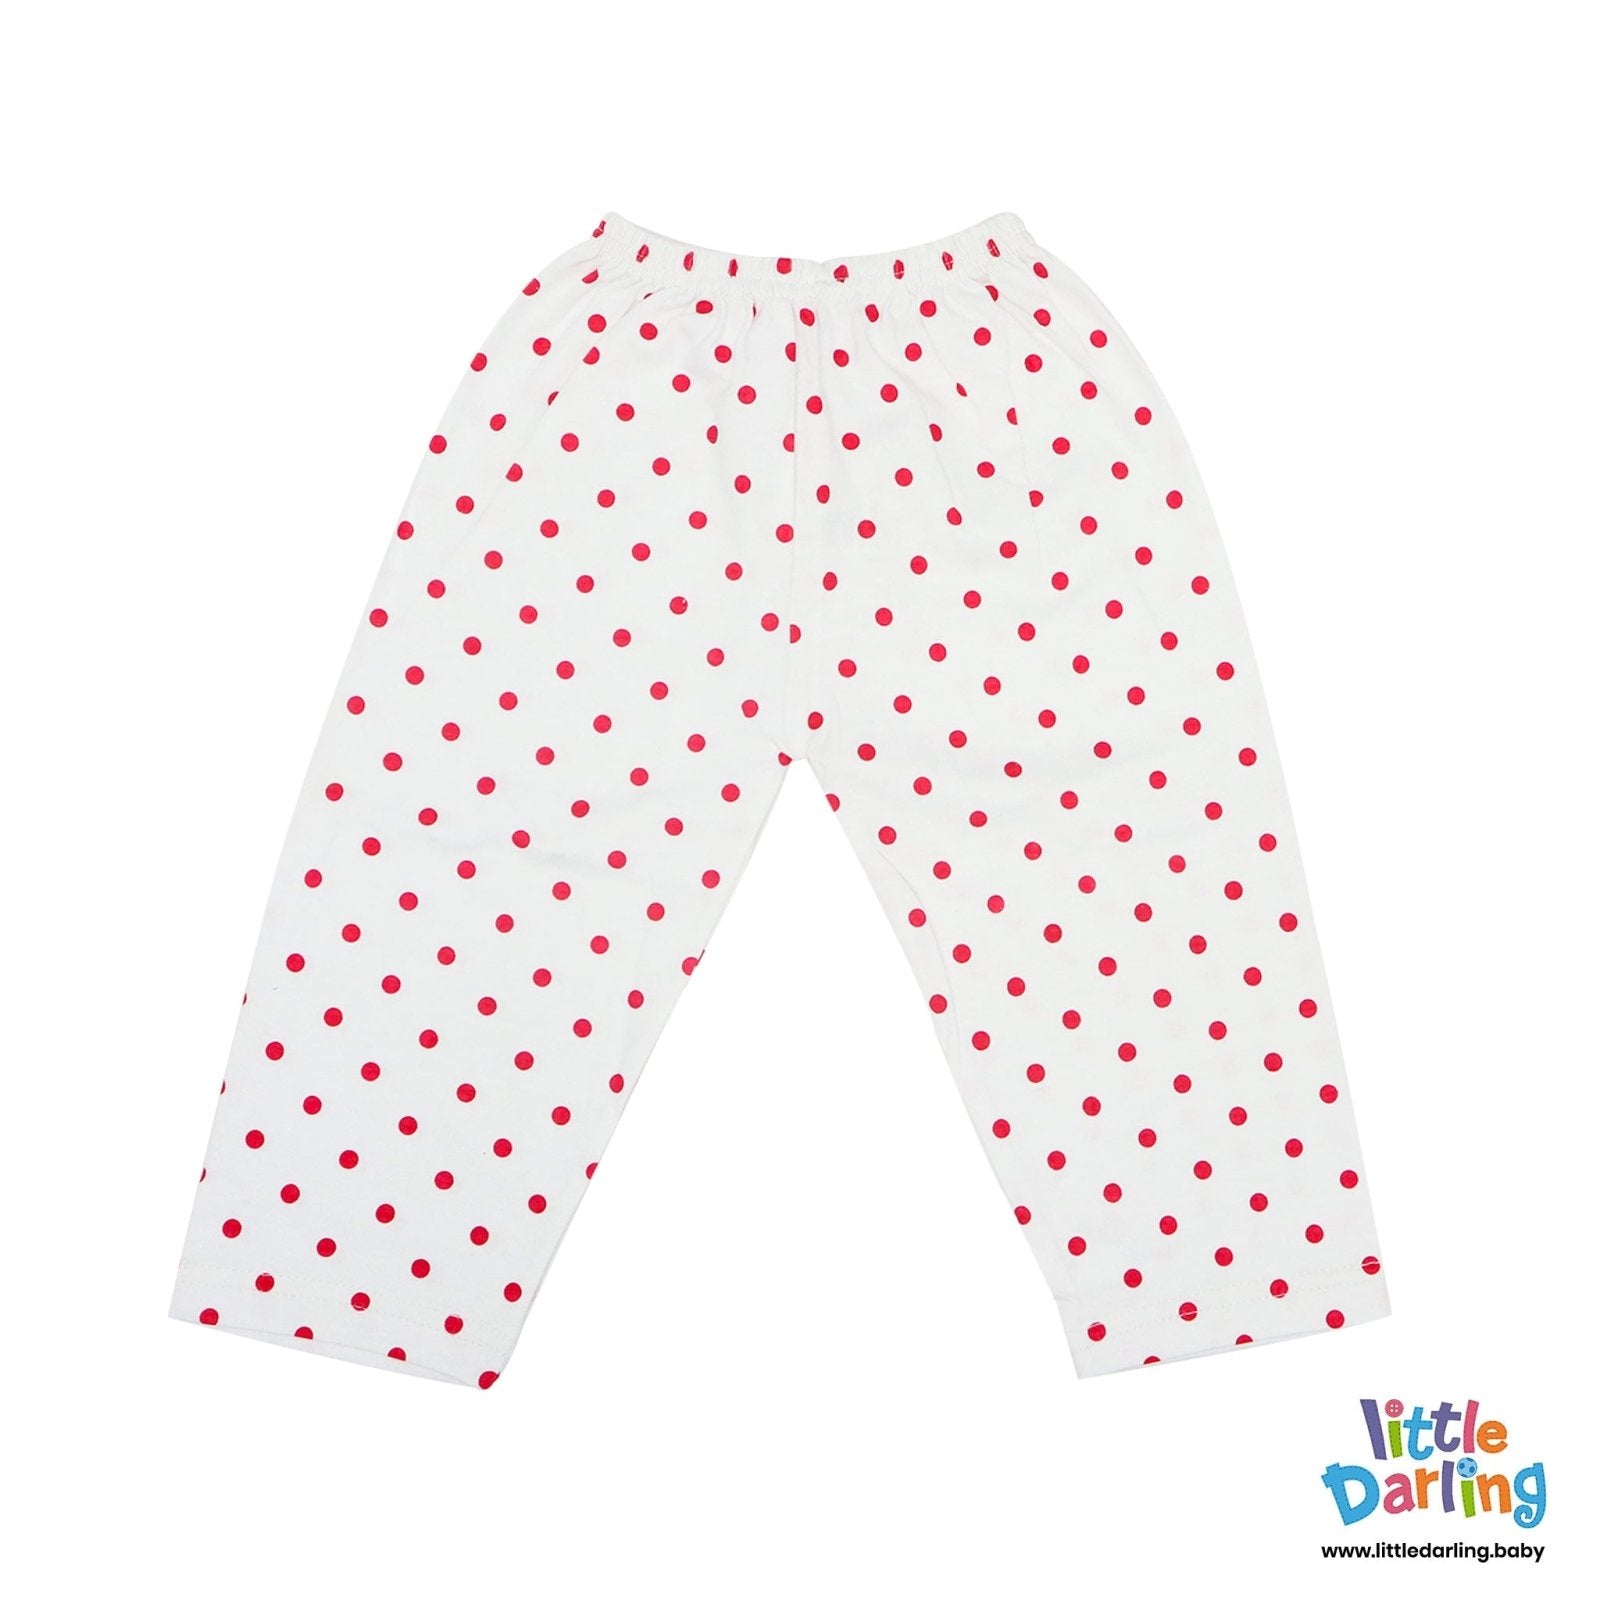 Baby Pajamas pk of 2 Red Dotted by Little Darling